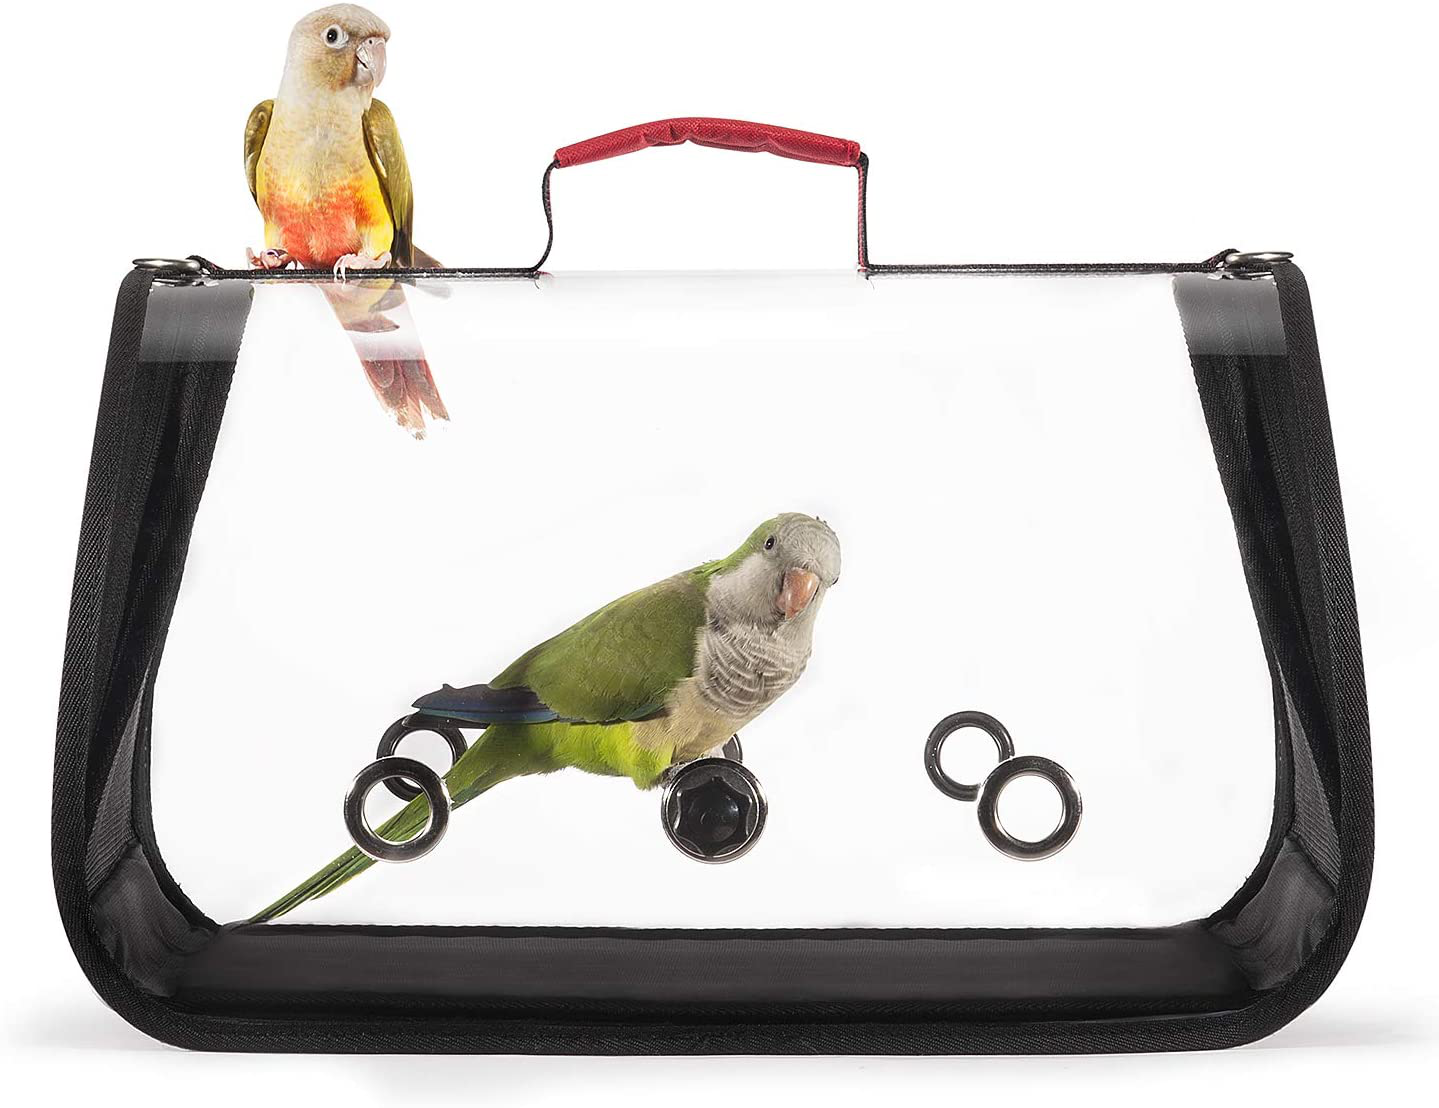 Colorday Lightweight Bird Carrier, Bird Travel Cage Parrot (Medium 16 X 9 X 11, Red) Patented Product